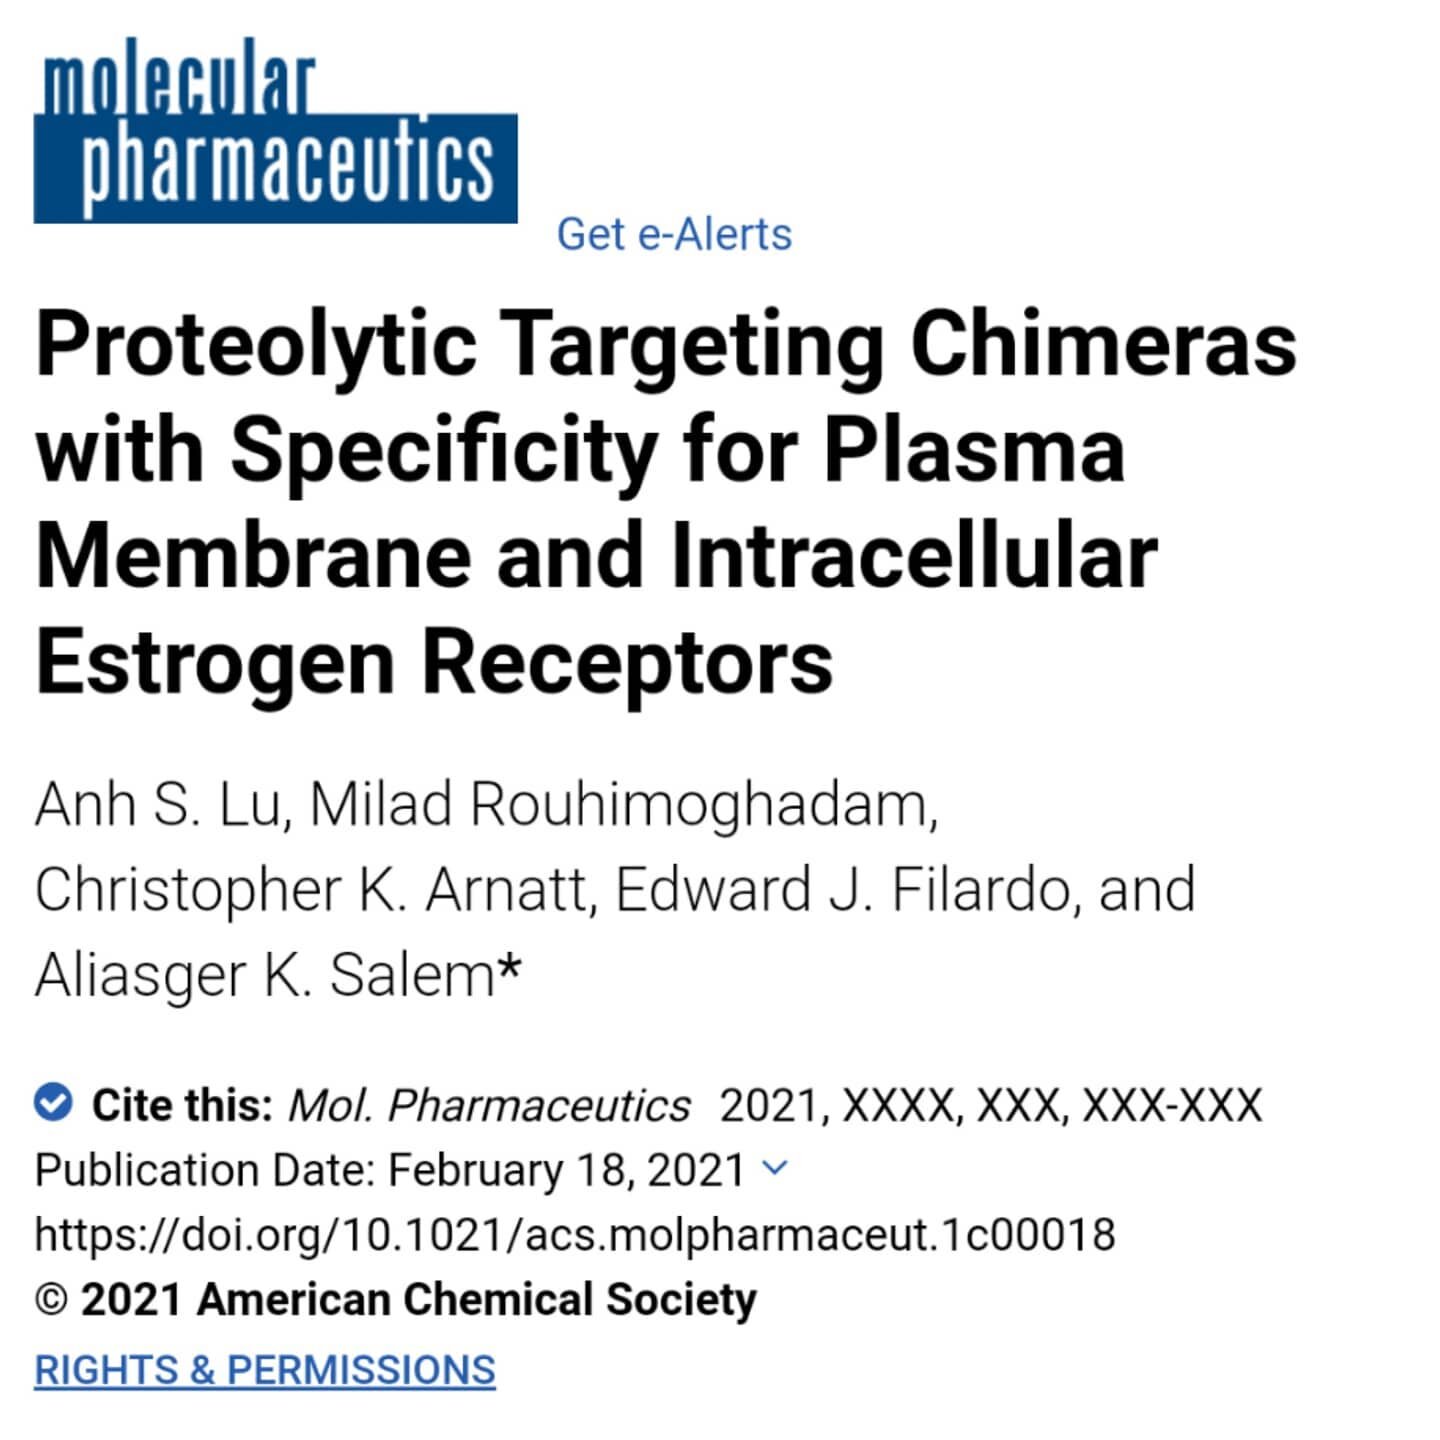 Our new collaboration with Drs. Filardo and Salam from University of Iowa looks at targeting PROTACs to both nuclear and membrane-bound estrogen receptors. A lot more interesting work to follow from this successful collaboration. https://pubs.acs.org